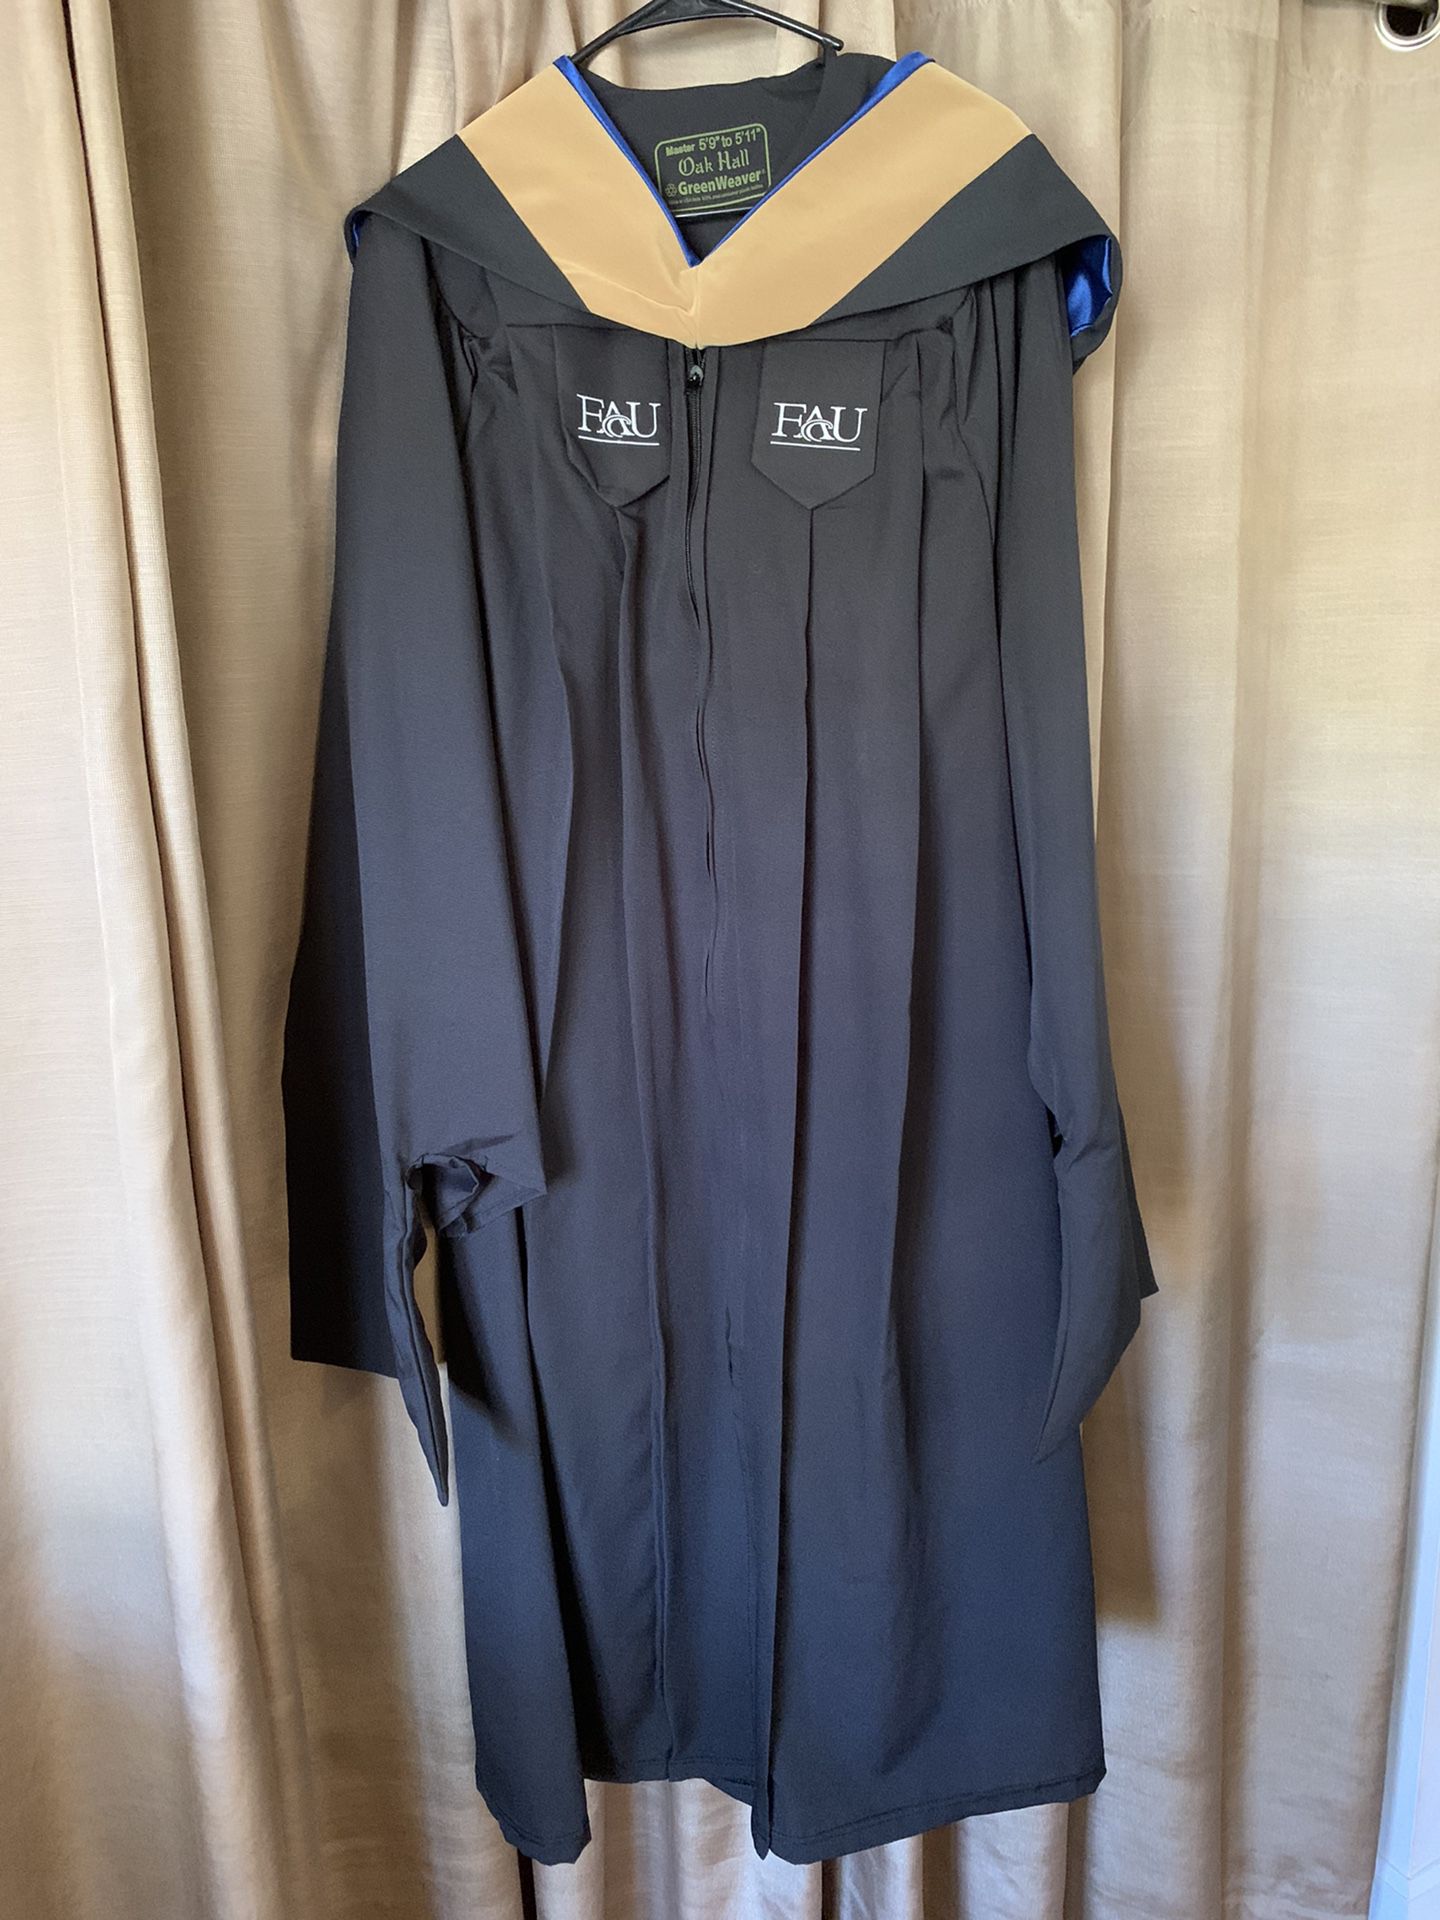 FAU Gown and Cap